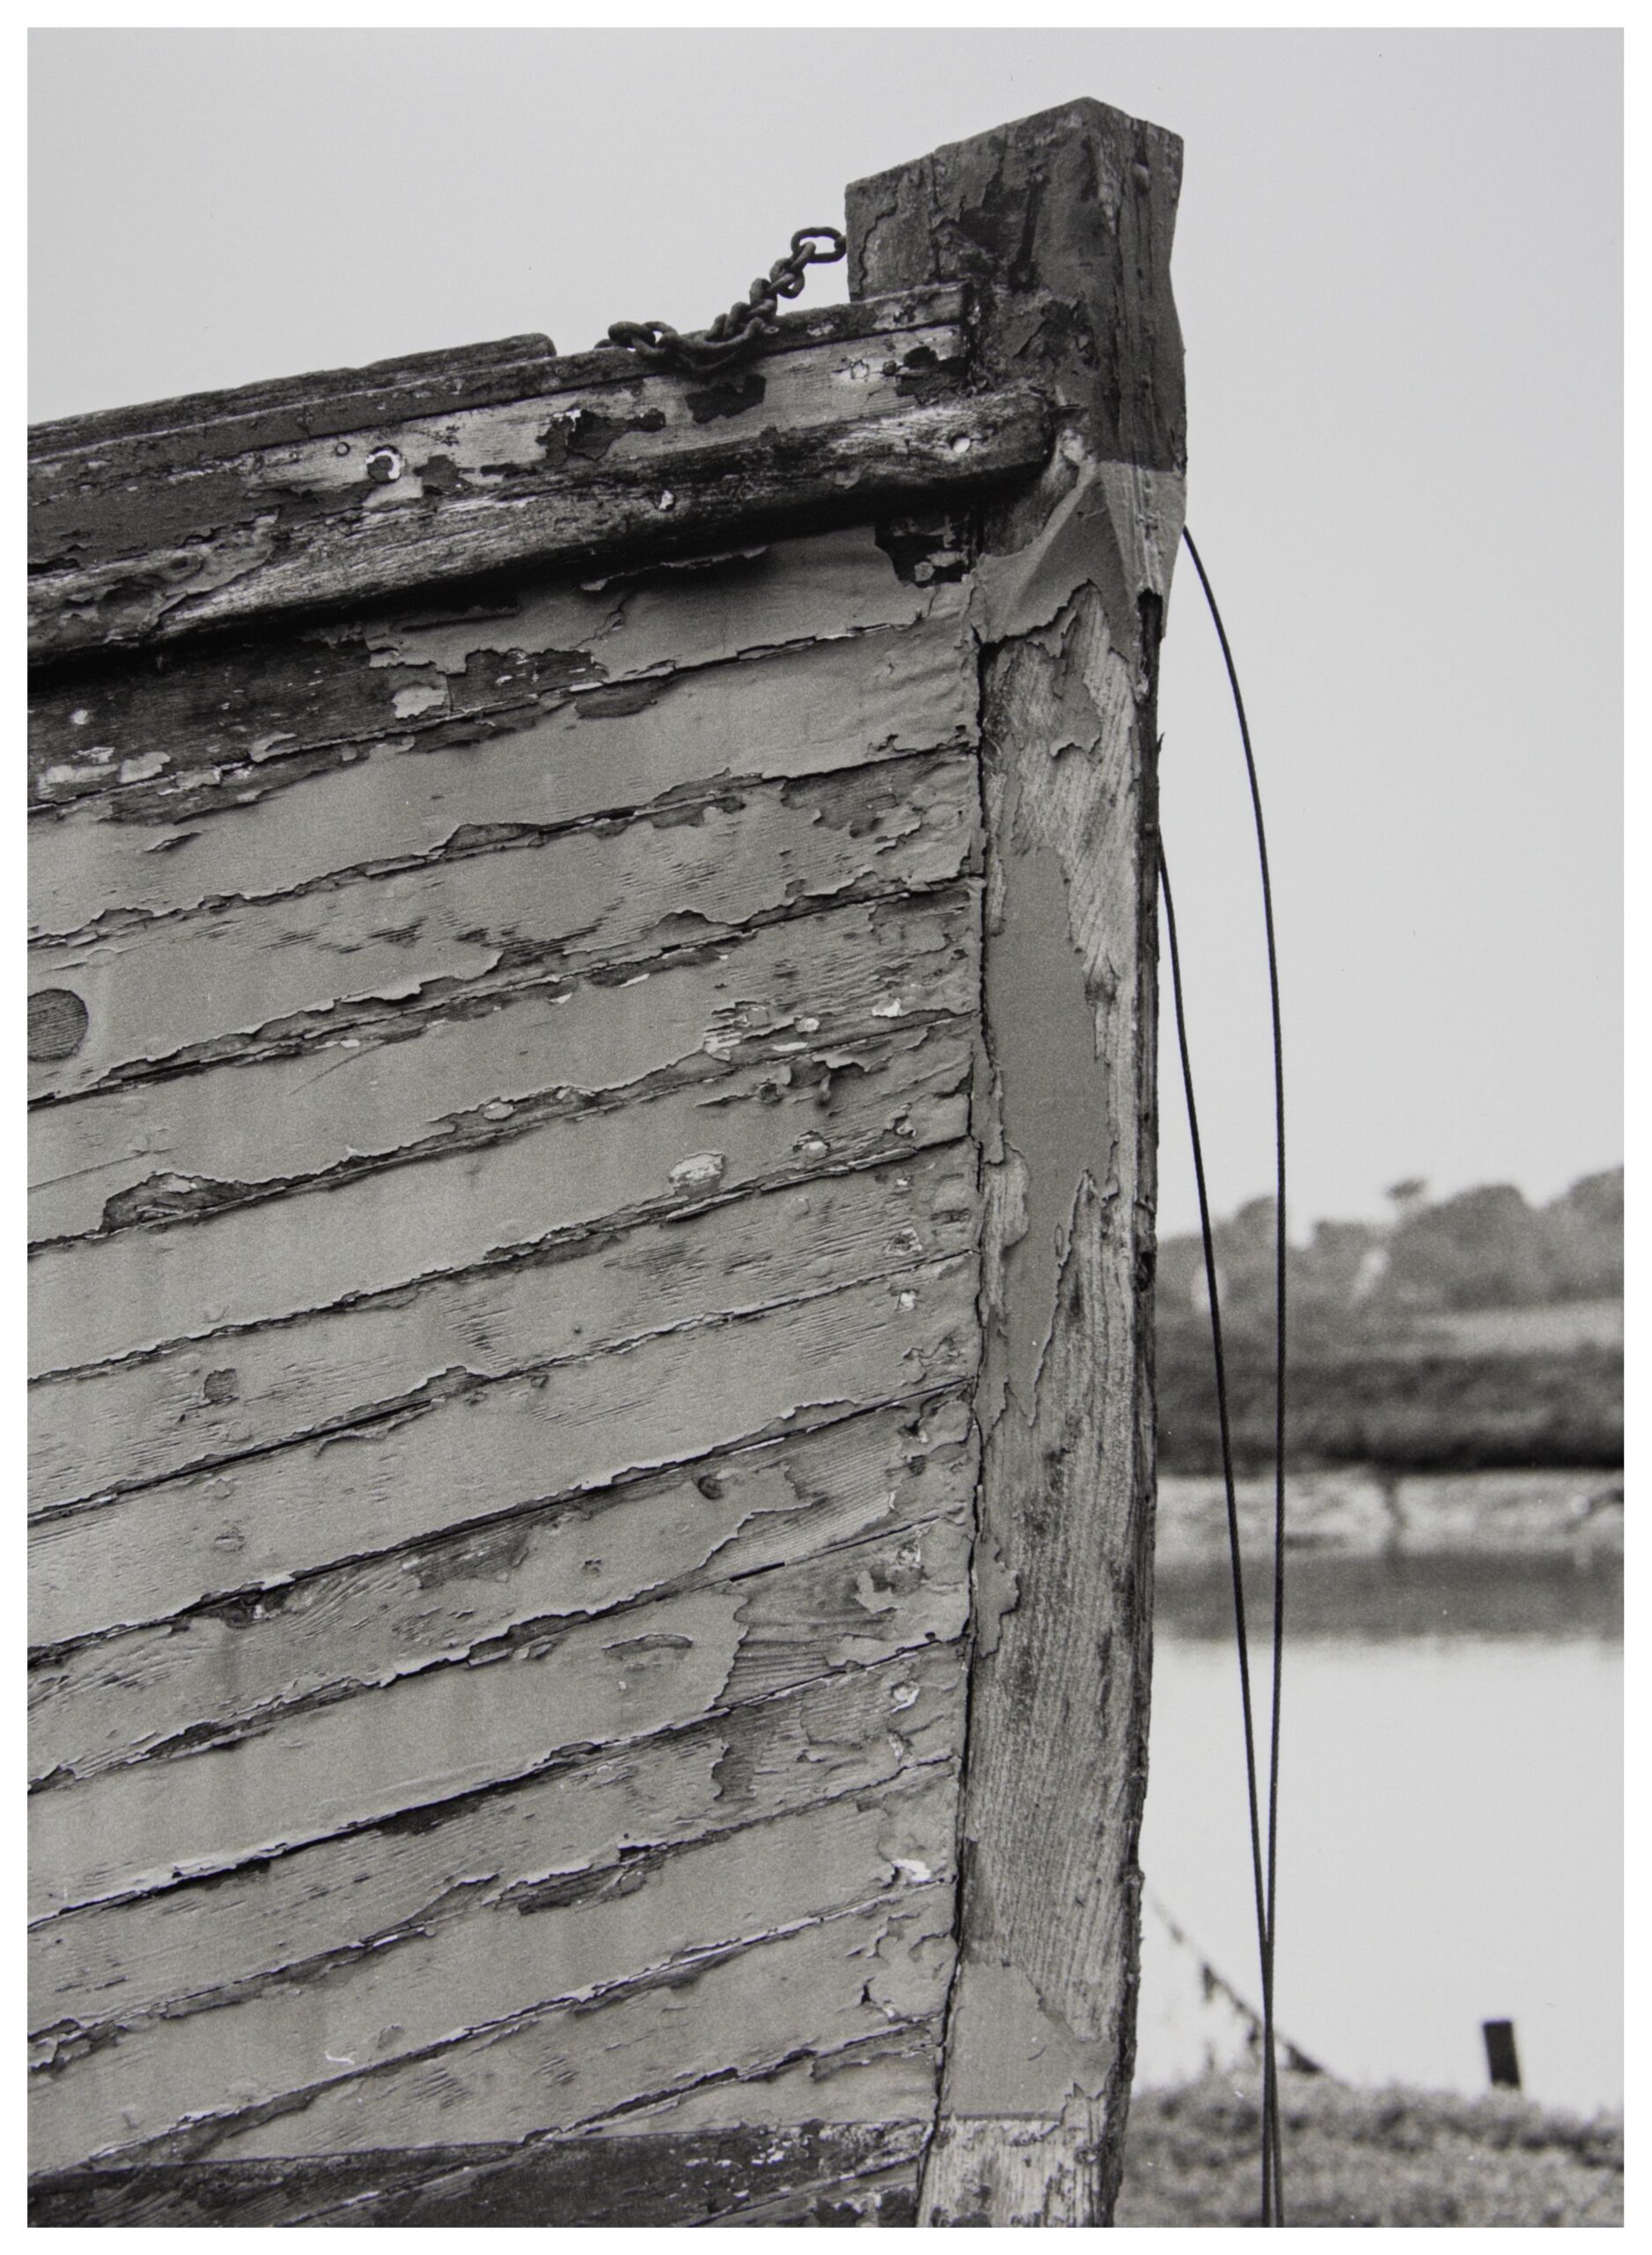 @JevonCarey Replying to @ILFORDPhoto Took this one one at Southwold Harbour, Ilford Delta Pro100 135 and printed on Ilford MGFB classic matt paper. Always had a fascintaion with old , decaying boats having worked on quite a few as a ferryboat skipper in my 30's and 40's. #ilfordphoto #fridayfavourites #boatsonfilm